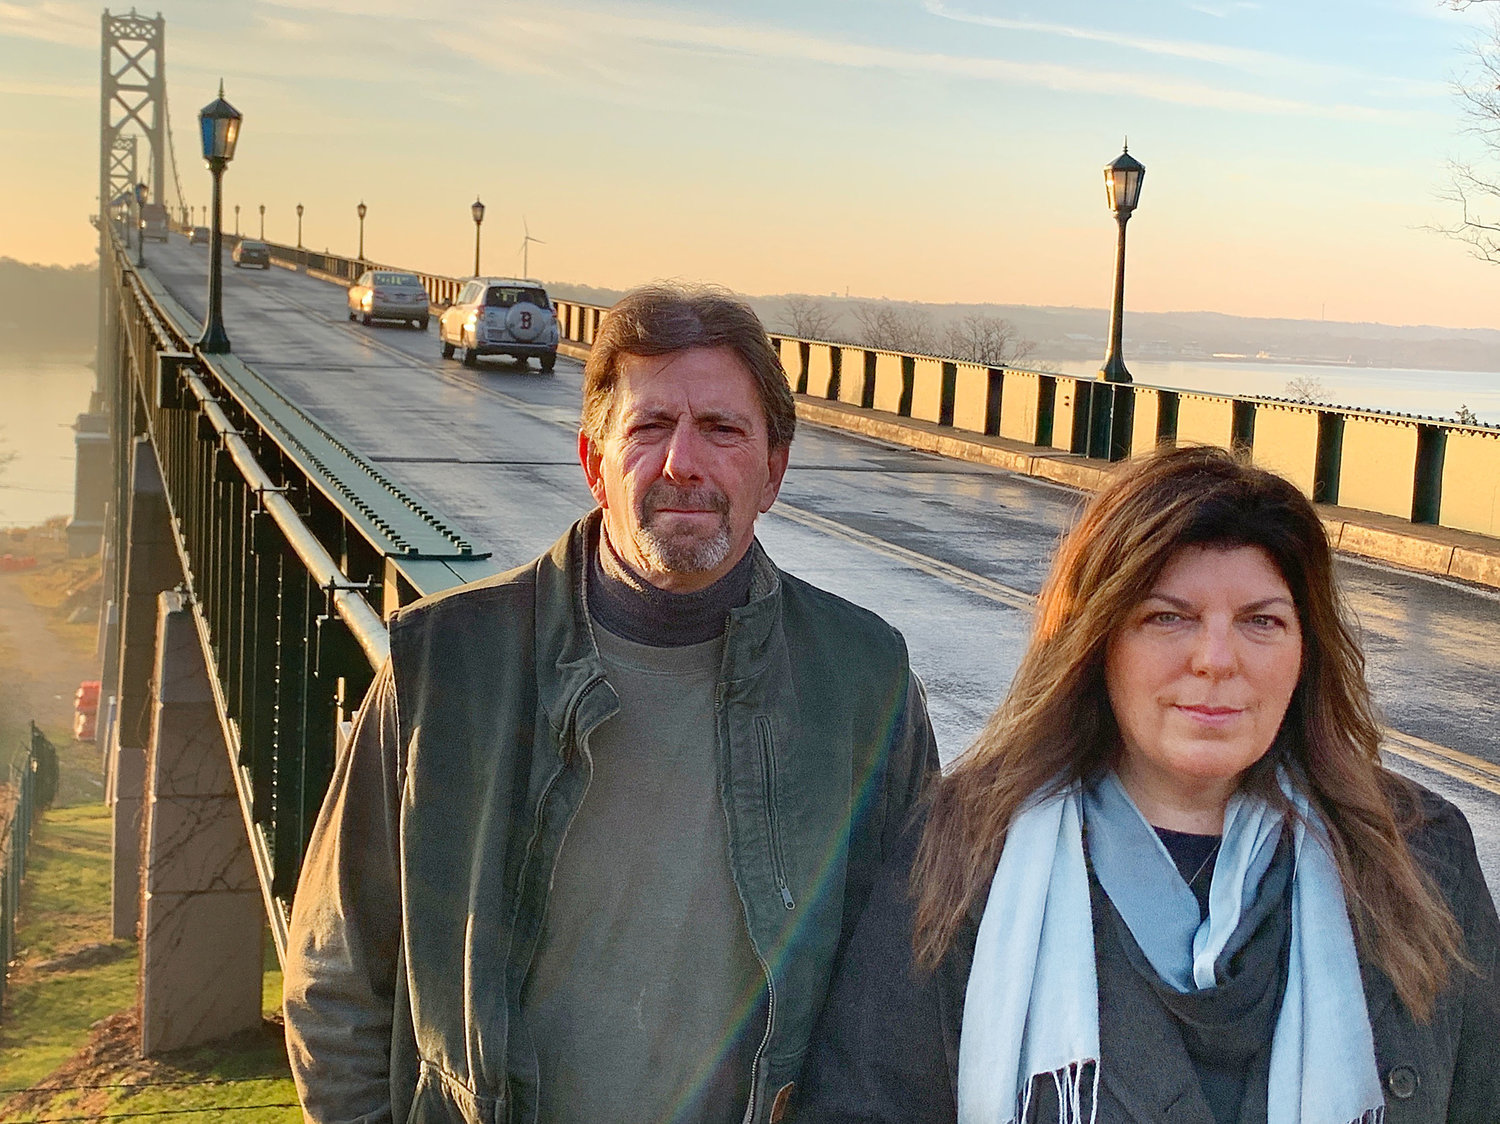 Bryan Ganley (left) lost a close friend to suicide. Melissa Cotta (right) tried to help but could not stop a man from jumping off the Mt. Hope Bridge. Together, they’re asking for suicide prevention barriers on the bridge, along with barriers on Rhode Island’s two other main bridges.